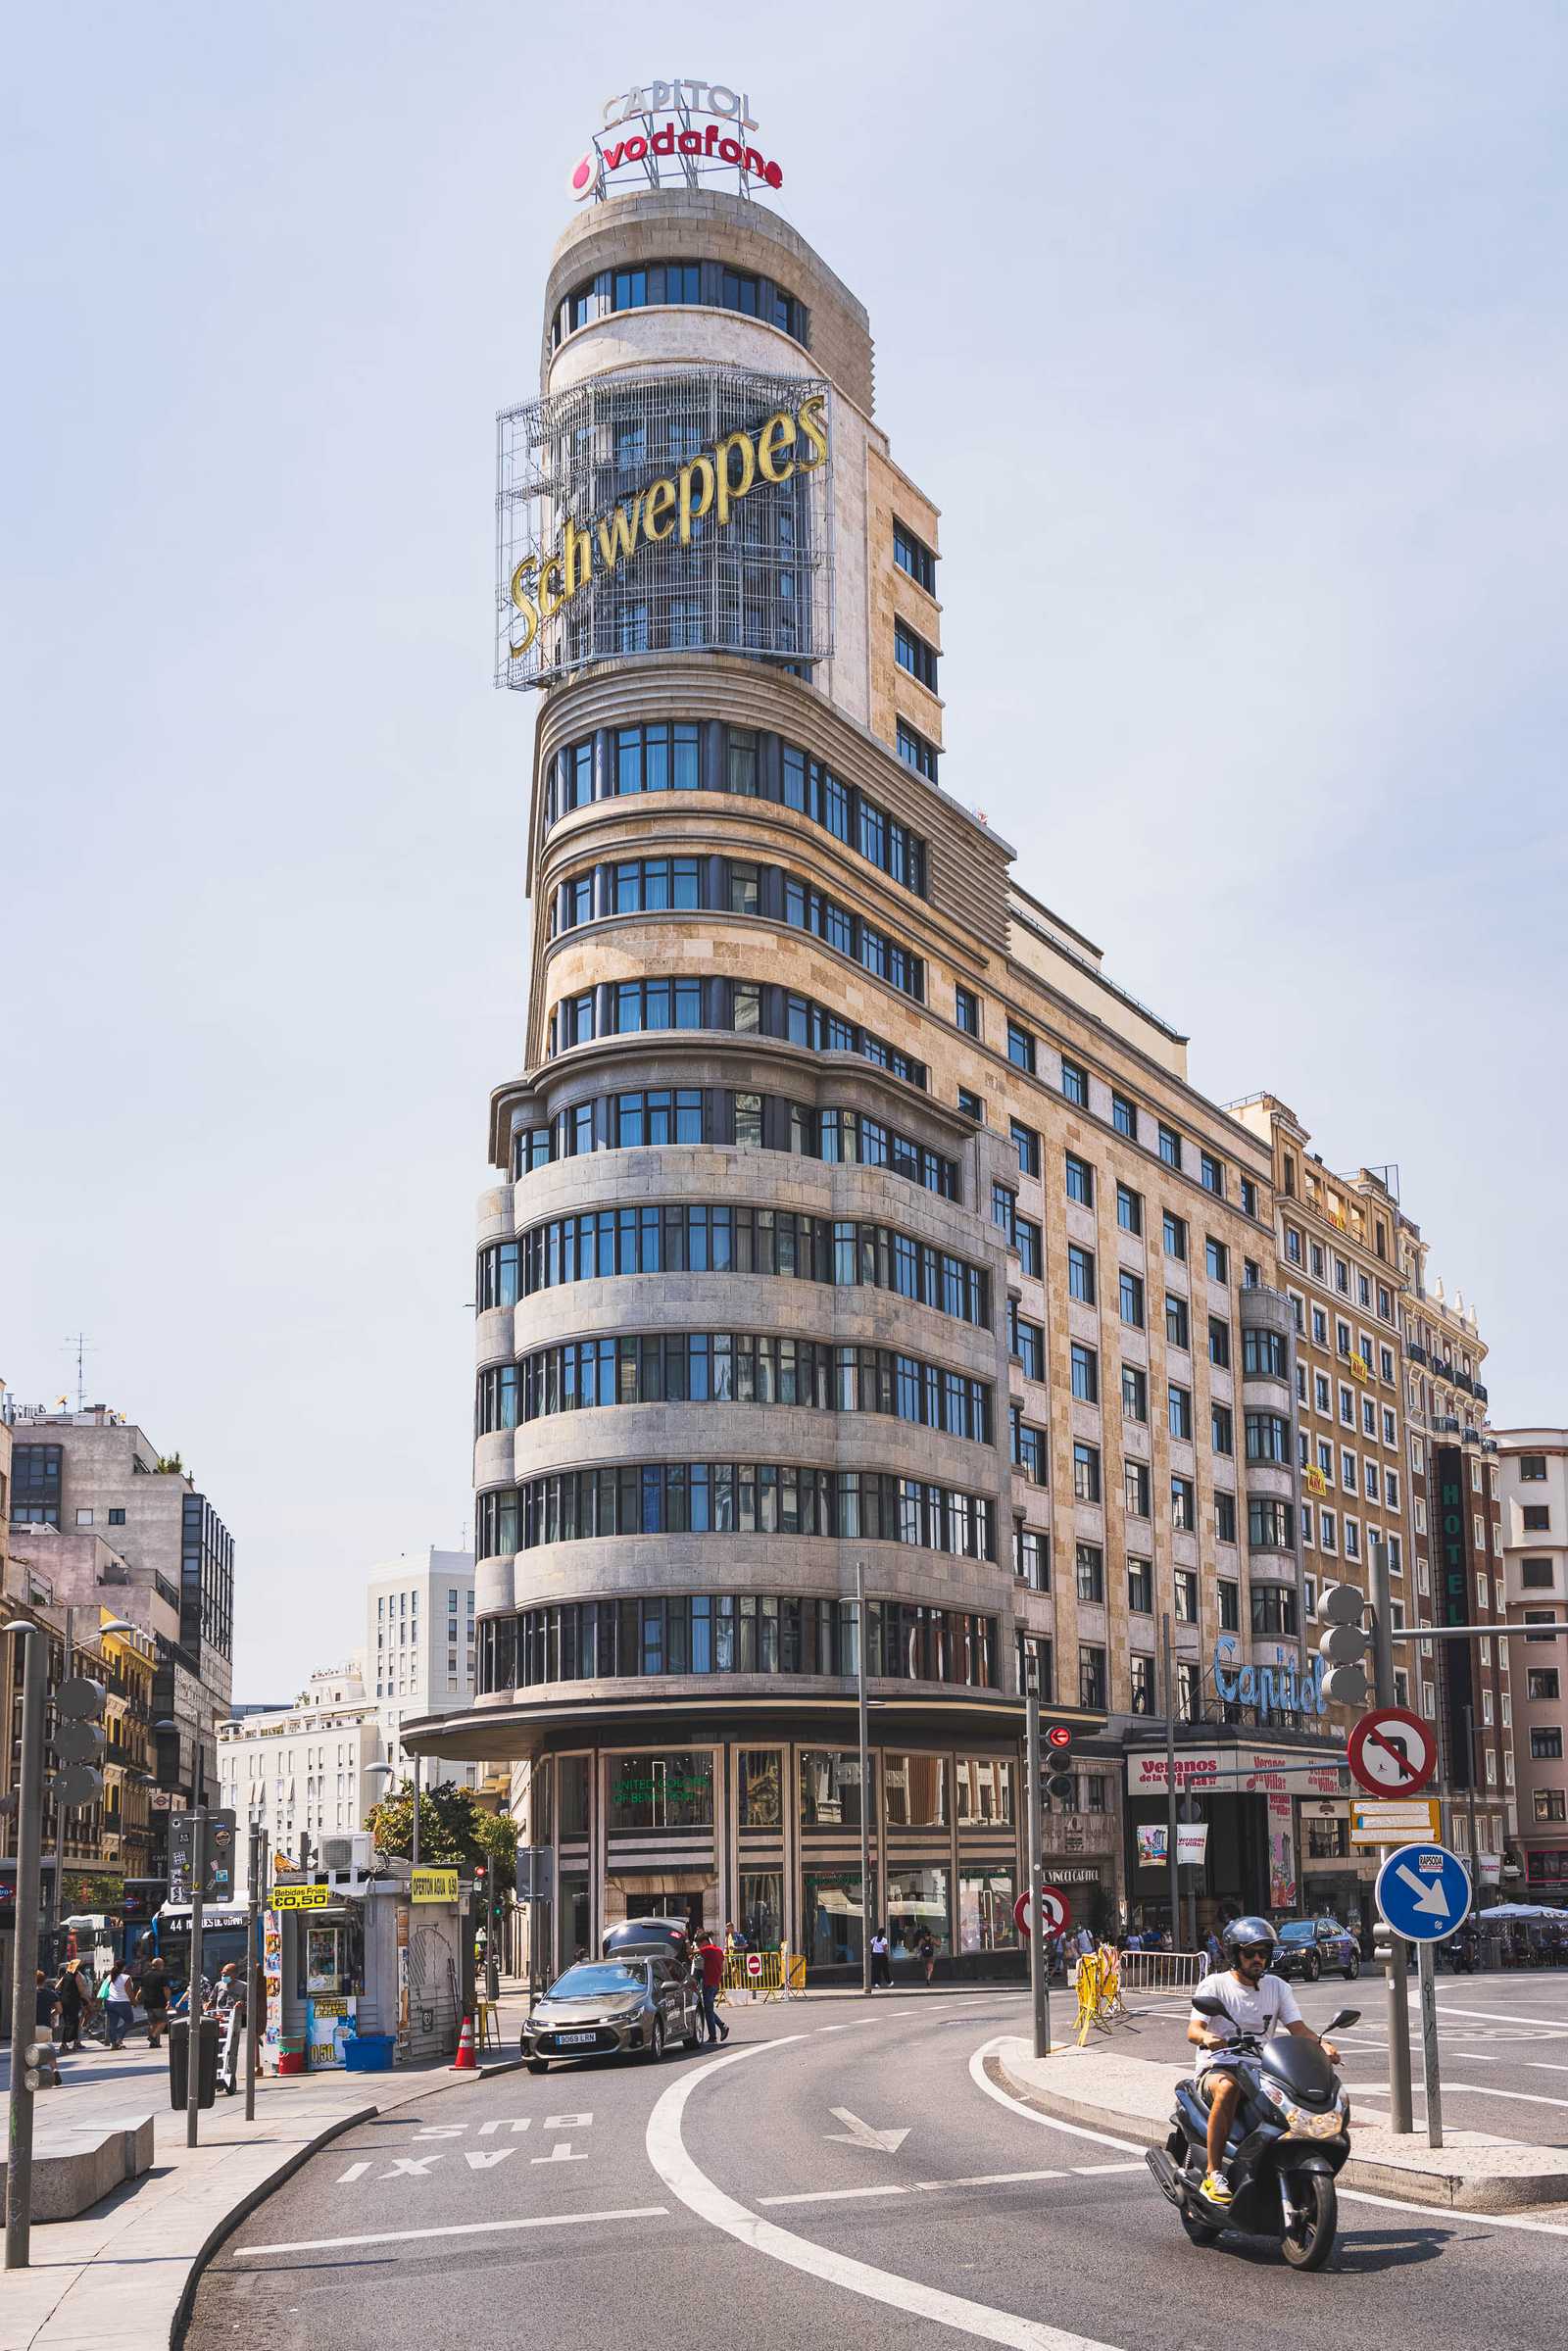 The iconic Schweppes sign above Callao in Madrid